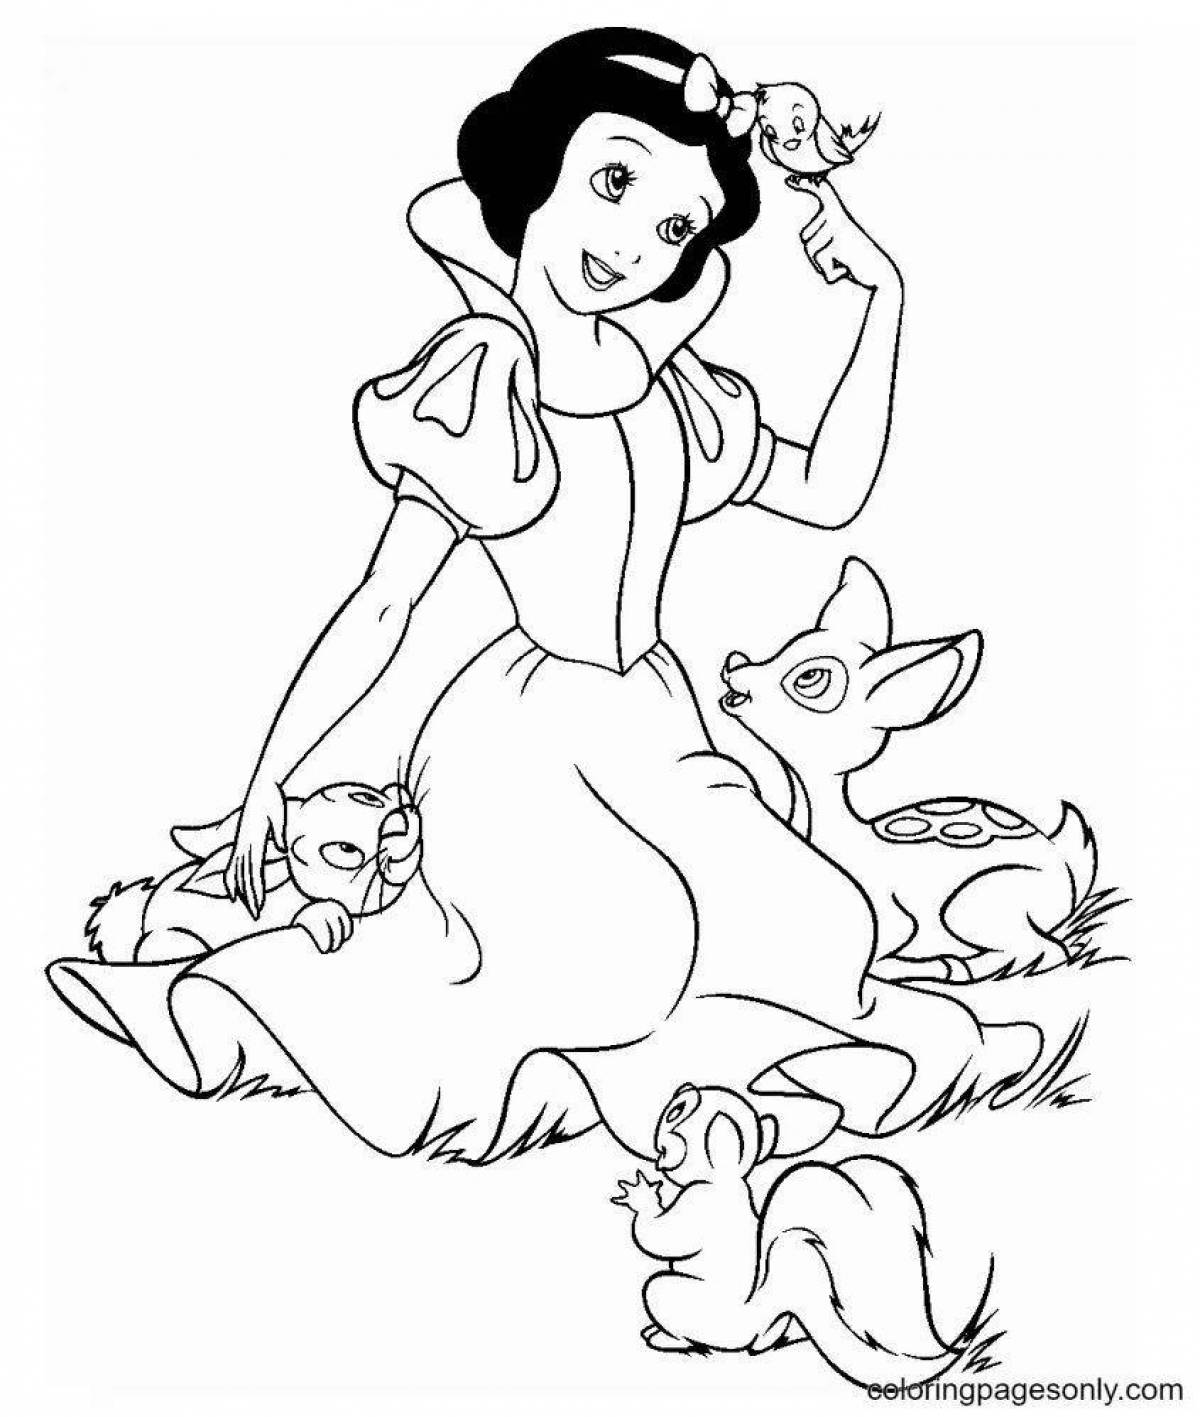 Adorable disney coloring book for kids 6-7 years old